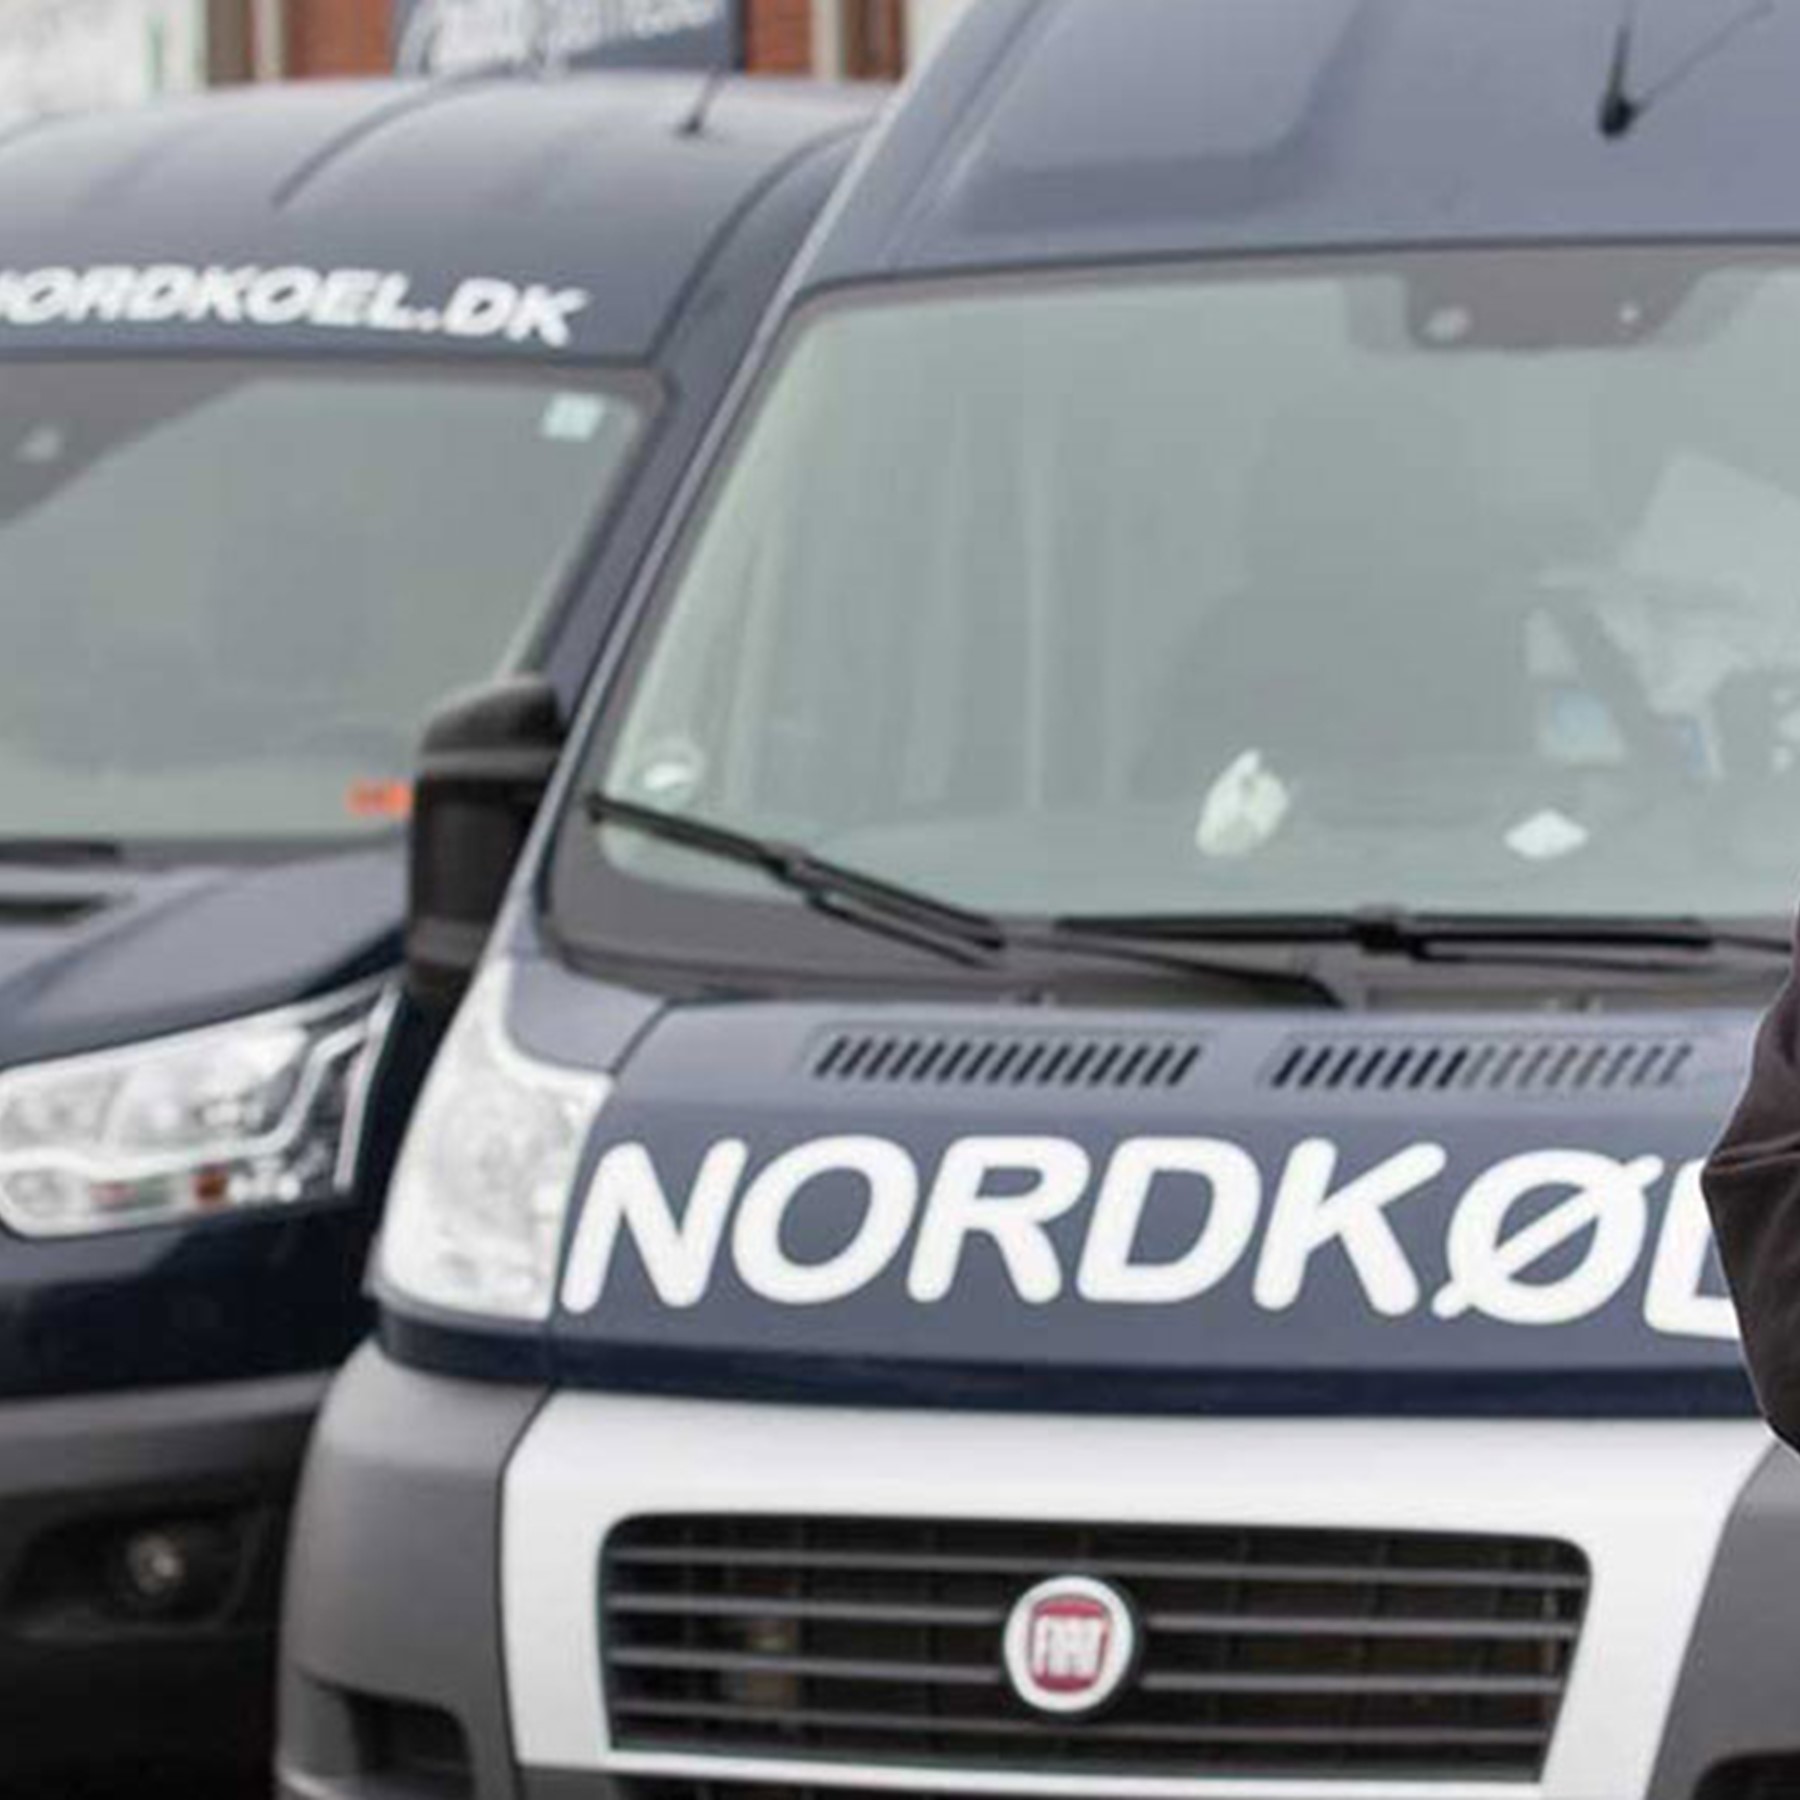 RSW Systems Nordkøl ApS